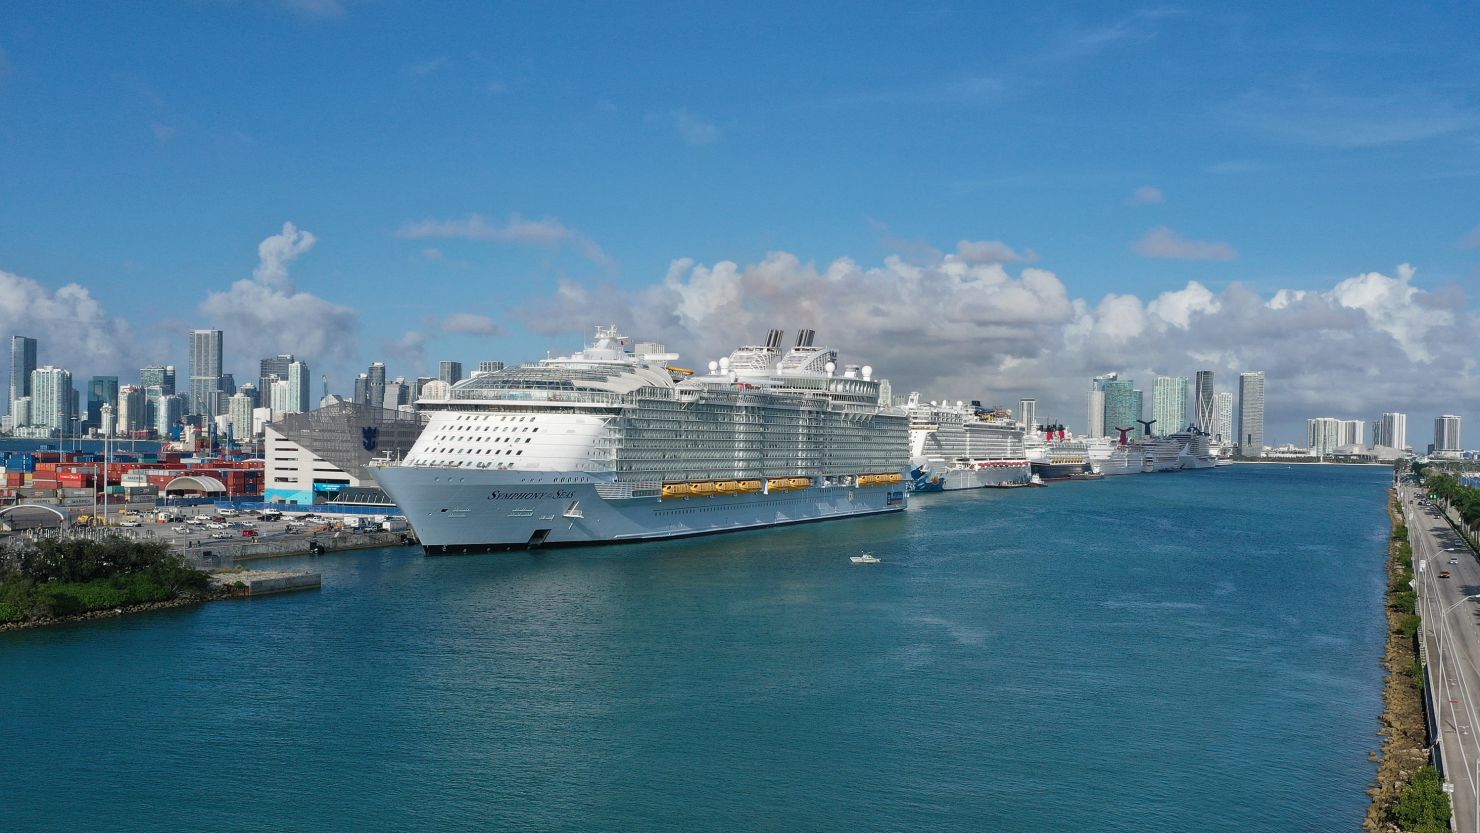 MIAMI, FLORIDA - MARCH 14: An aerial view from a drone shows the Royal Caribbean Symphony of the Seas Cruise ship which is the world's largest passenger liner docked at PortMiami after returning to port from a Eastern Caribbean cruise as the world deals with the coronavirus outbreak on March 14, 2020 in Miami, Florida. U.S. President Donald Trump tweeted yesterday that at his request Carnival, Royal Caribbean, Norwegian, and MSC have all agreed to suspend outbound cruises as the world tries to contain the COVID-19 outbreak. (Photo by Joe Raedle/Getty Images)